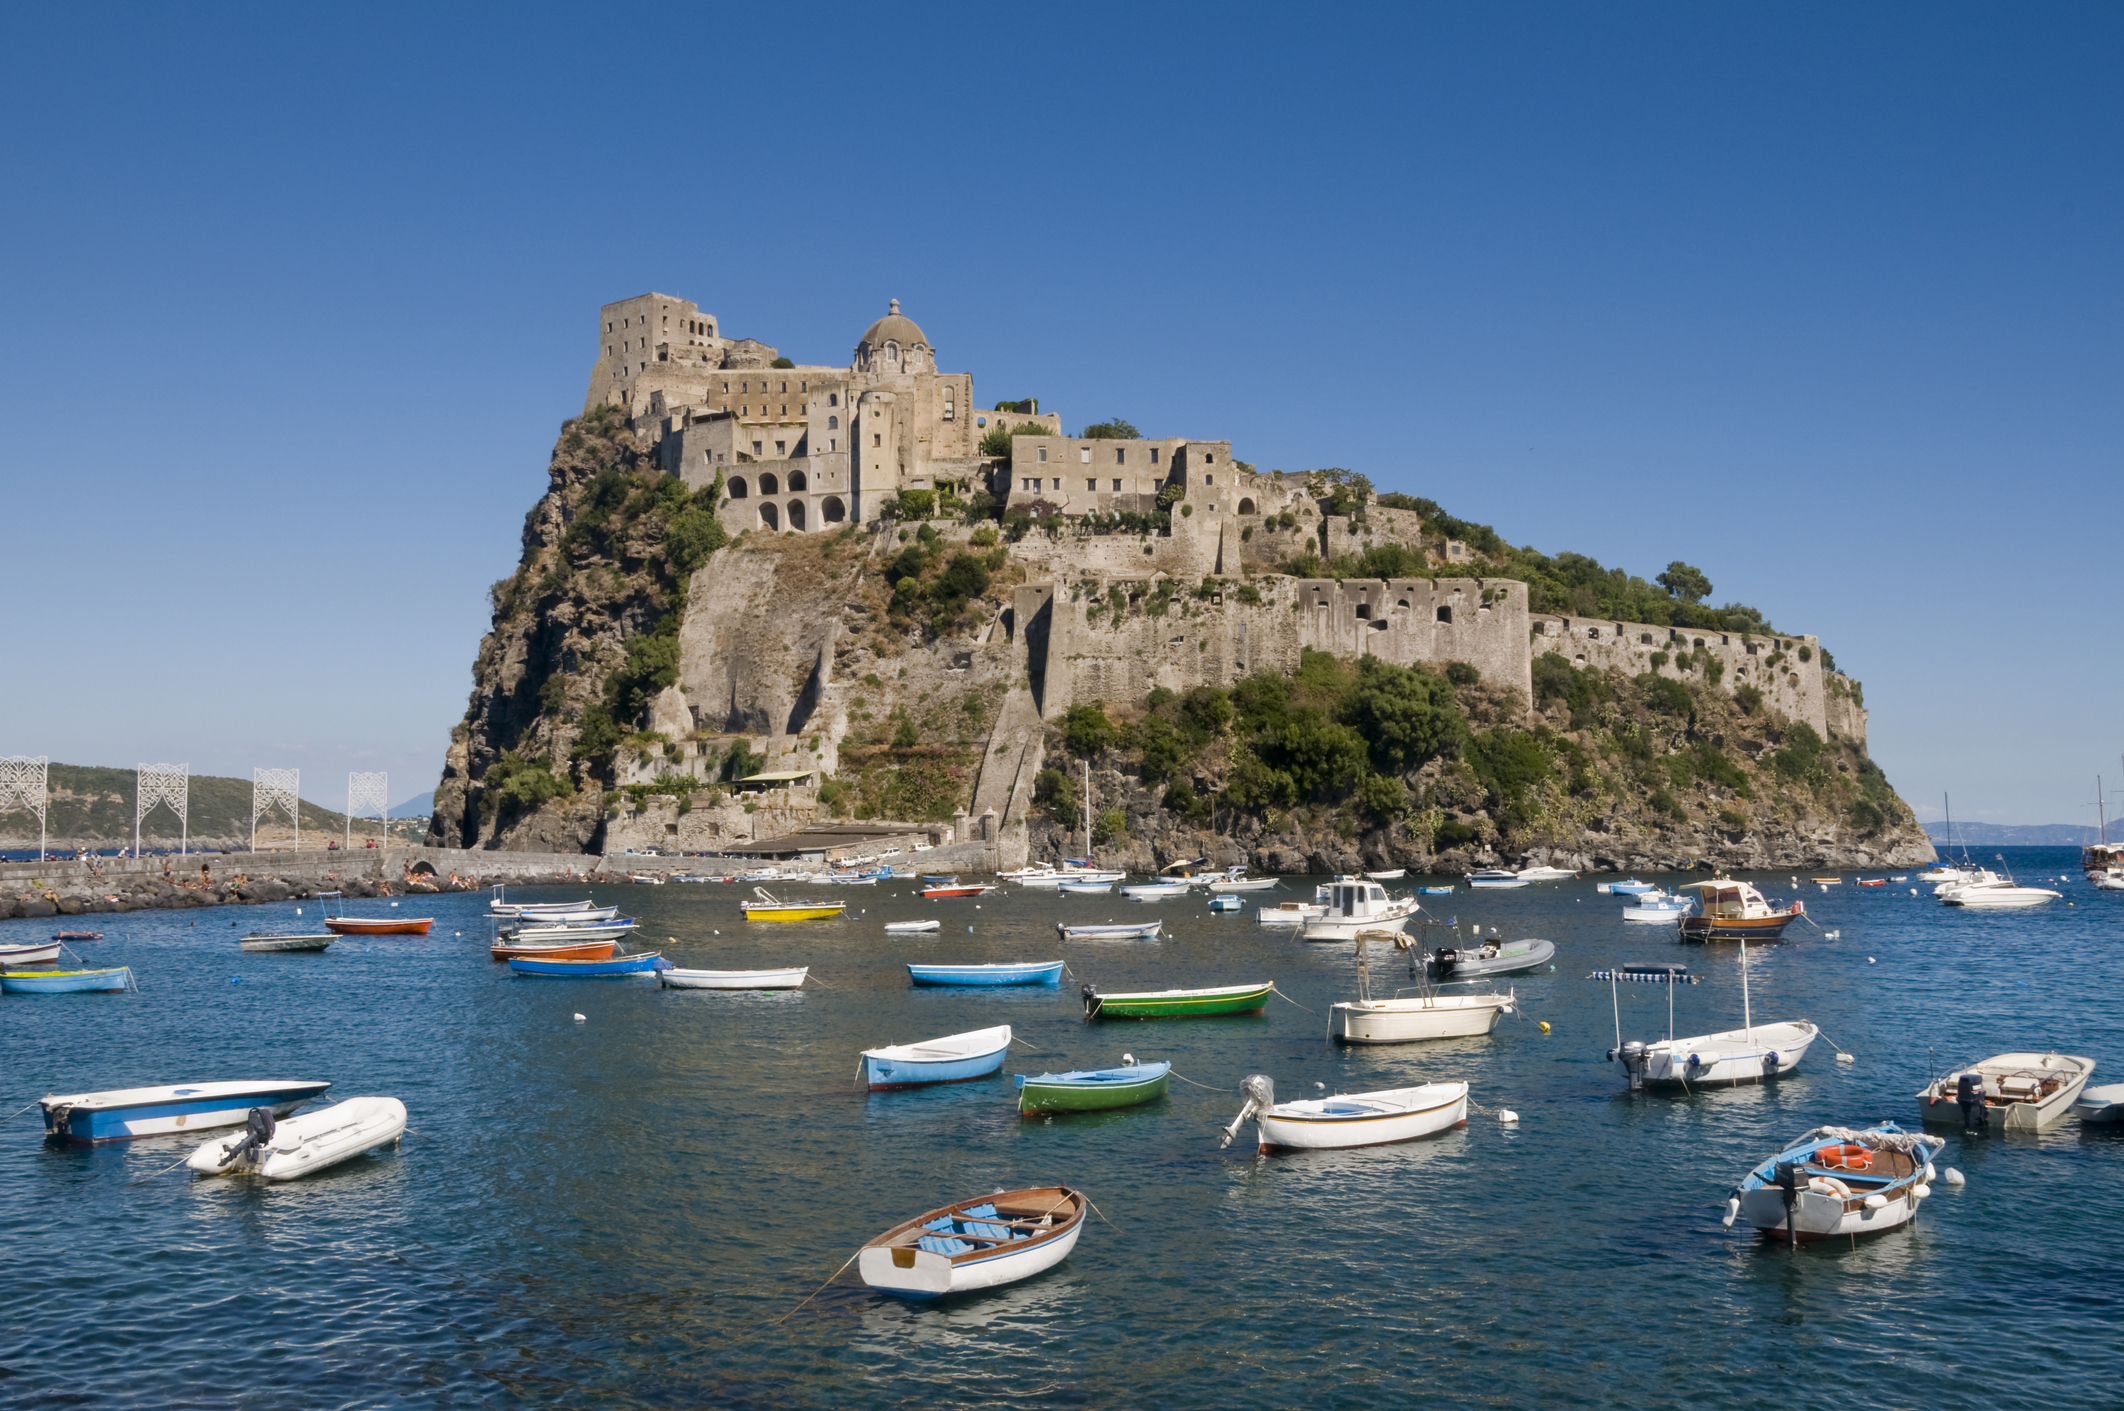 "Castello Aragonese in Ischia Ponte, on Ischia island near Naples, Italy. Many little boats in the sea."